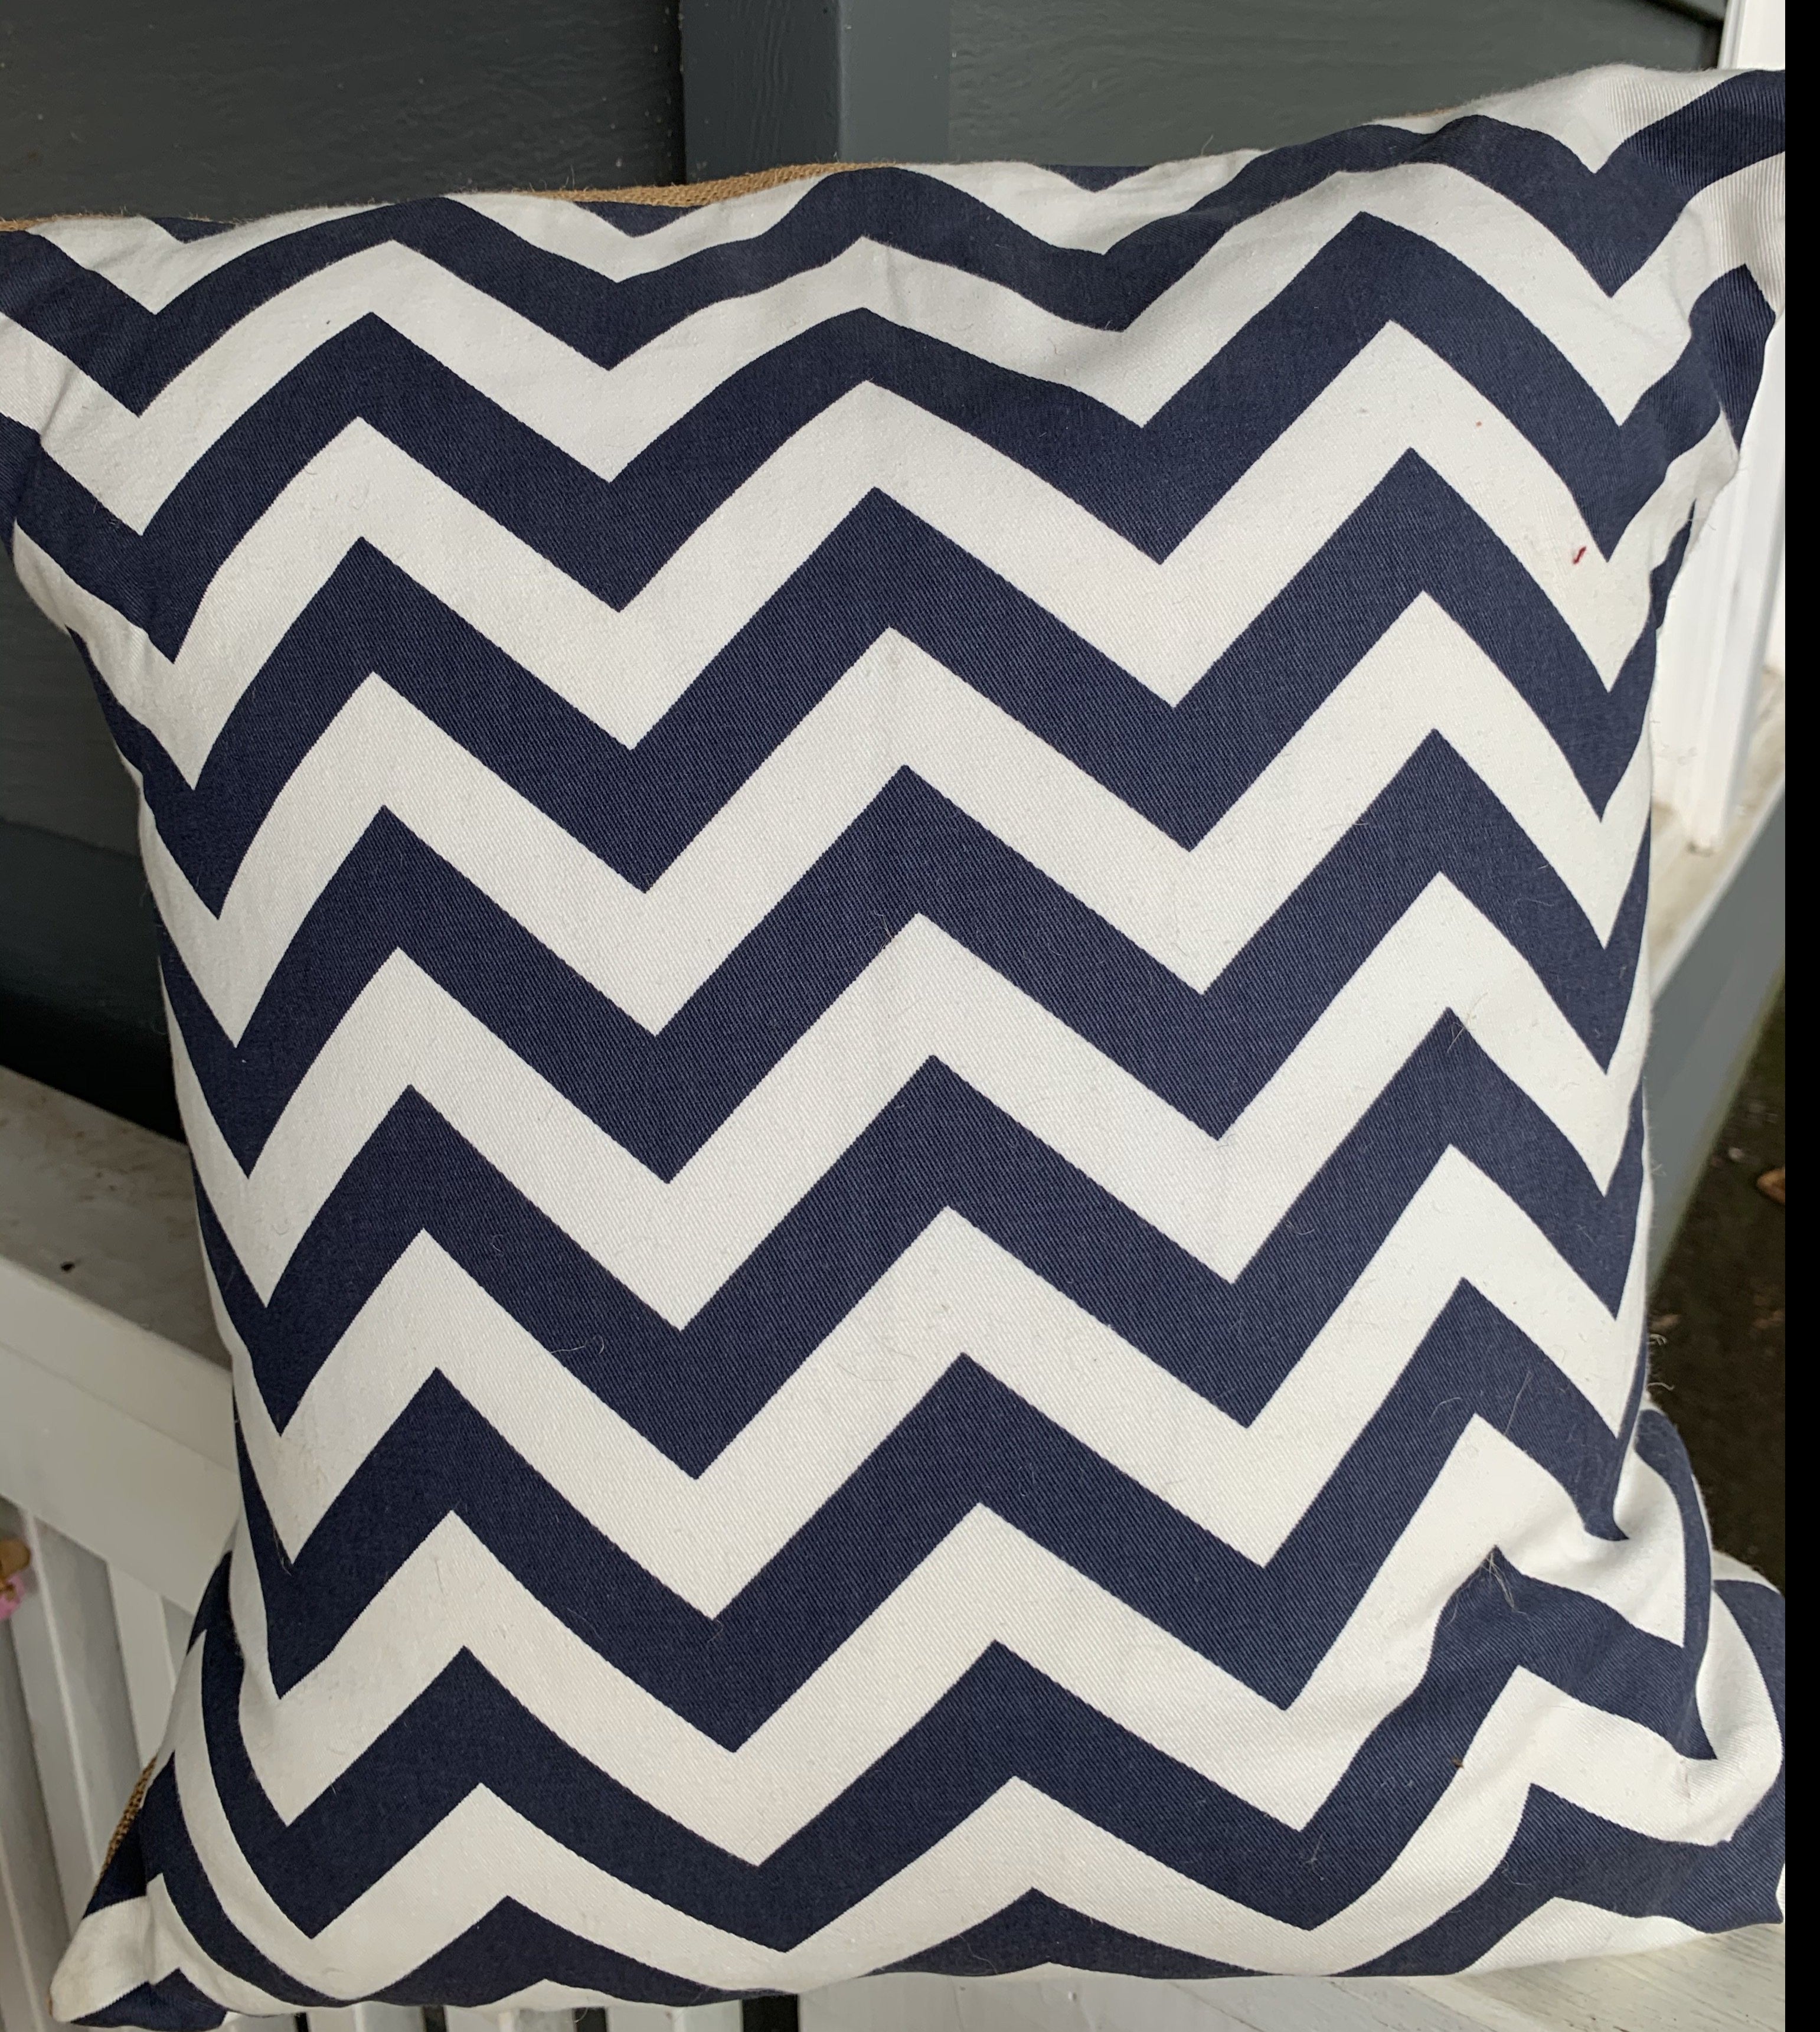 Navy & White Chevron print on the front and burlap on the pack. Pillow is stuffed with feathers.